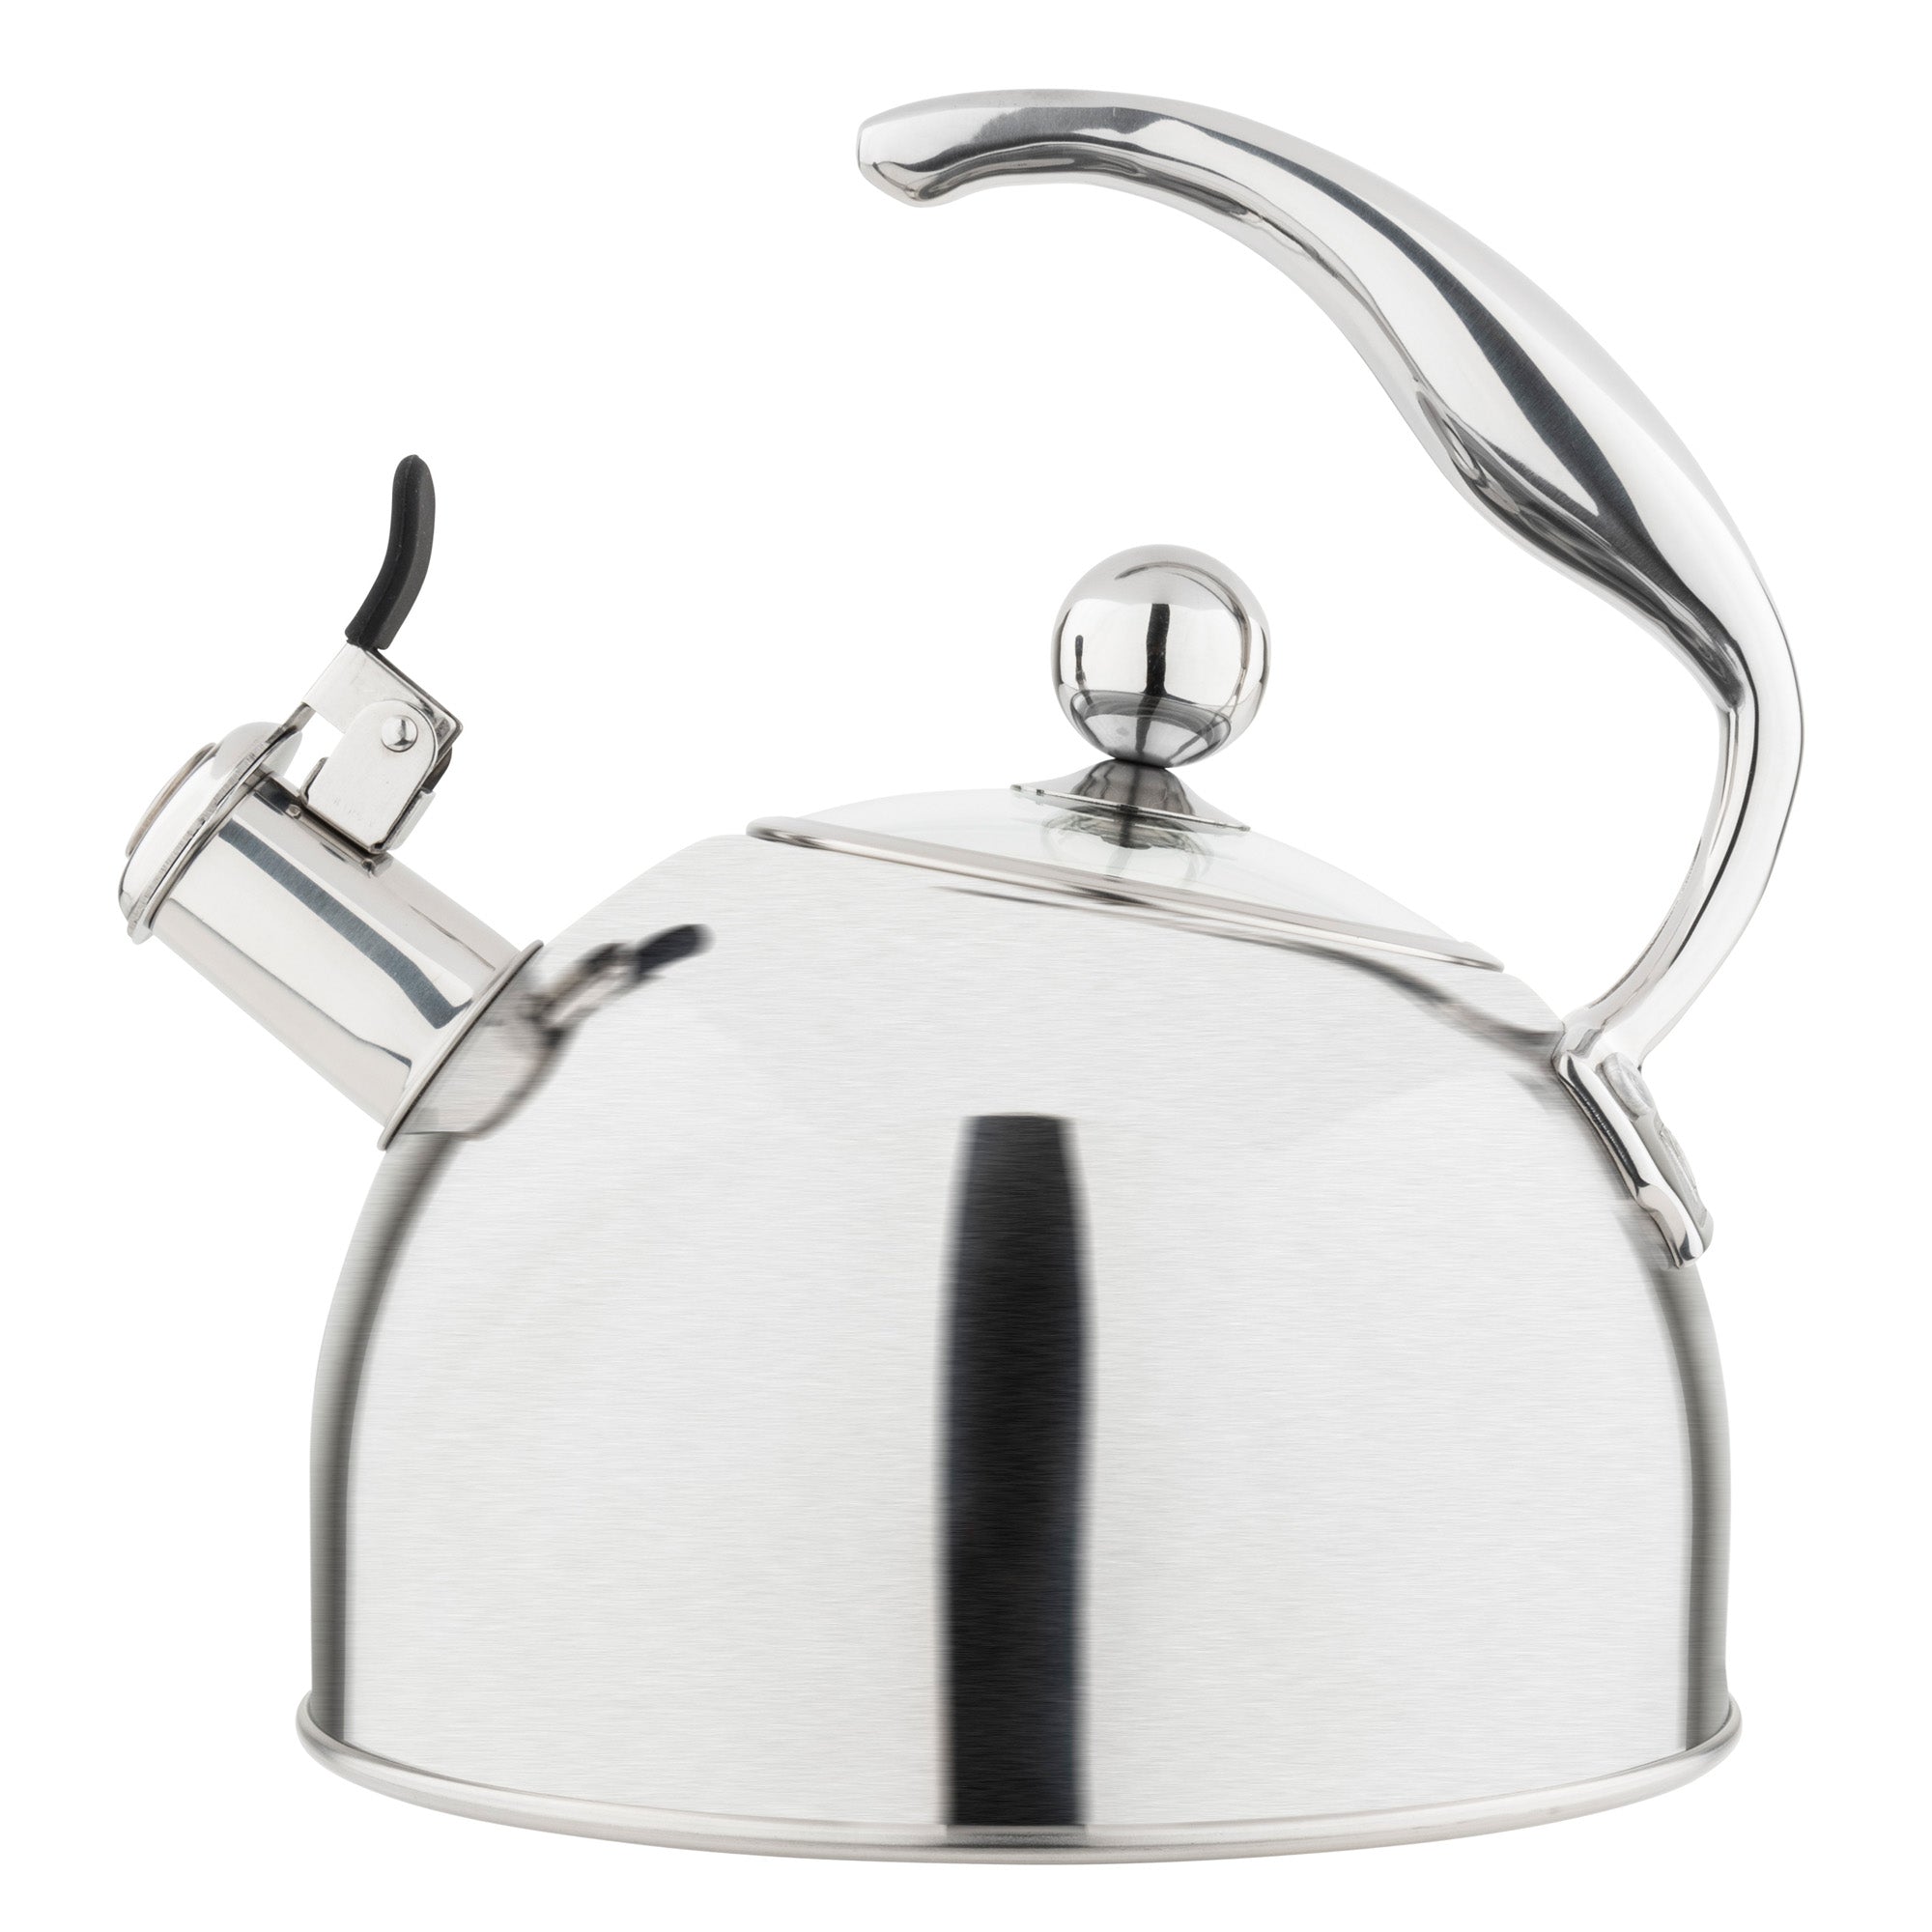 Stove Top Kettle Whistling Tea Kettle Stainless Steel Whistle Kettle  Teakettle With Infuser Kitchen Stovetop Teapot Tea Kettle Induction Cooker  Gas